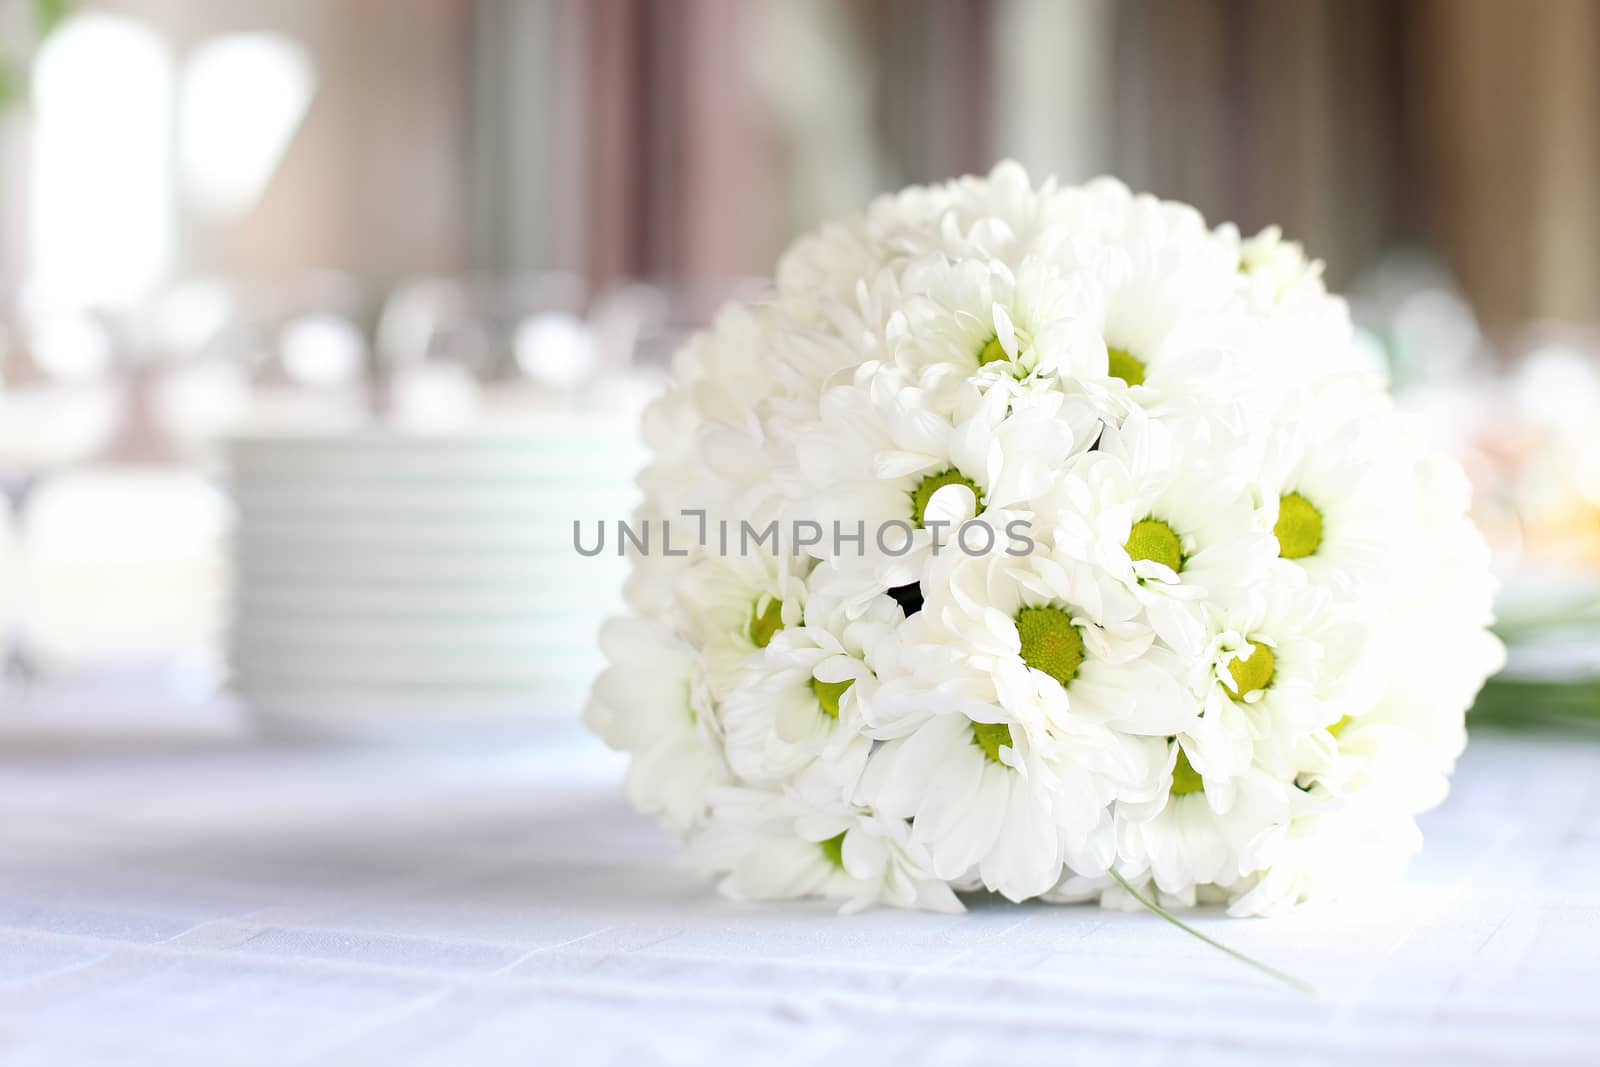 Decoration of the dining table for wedding reception, bouquet of daisies